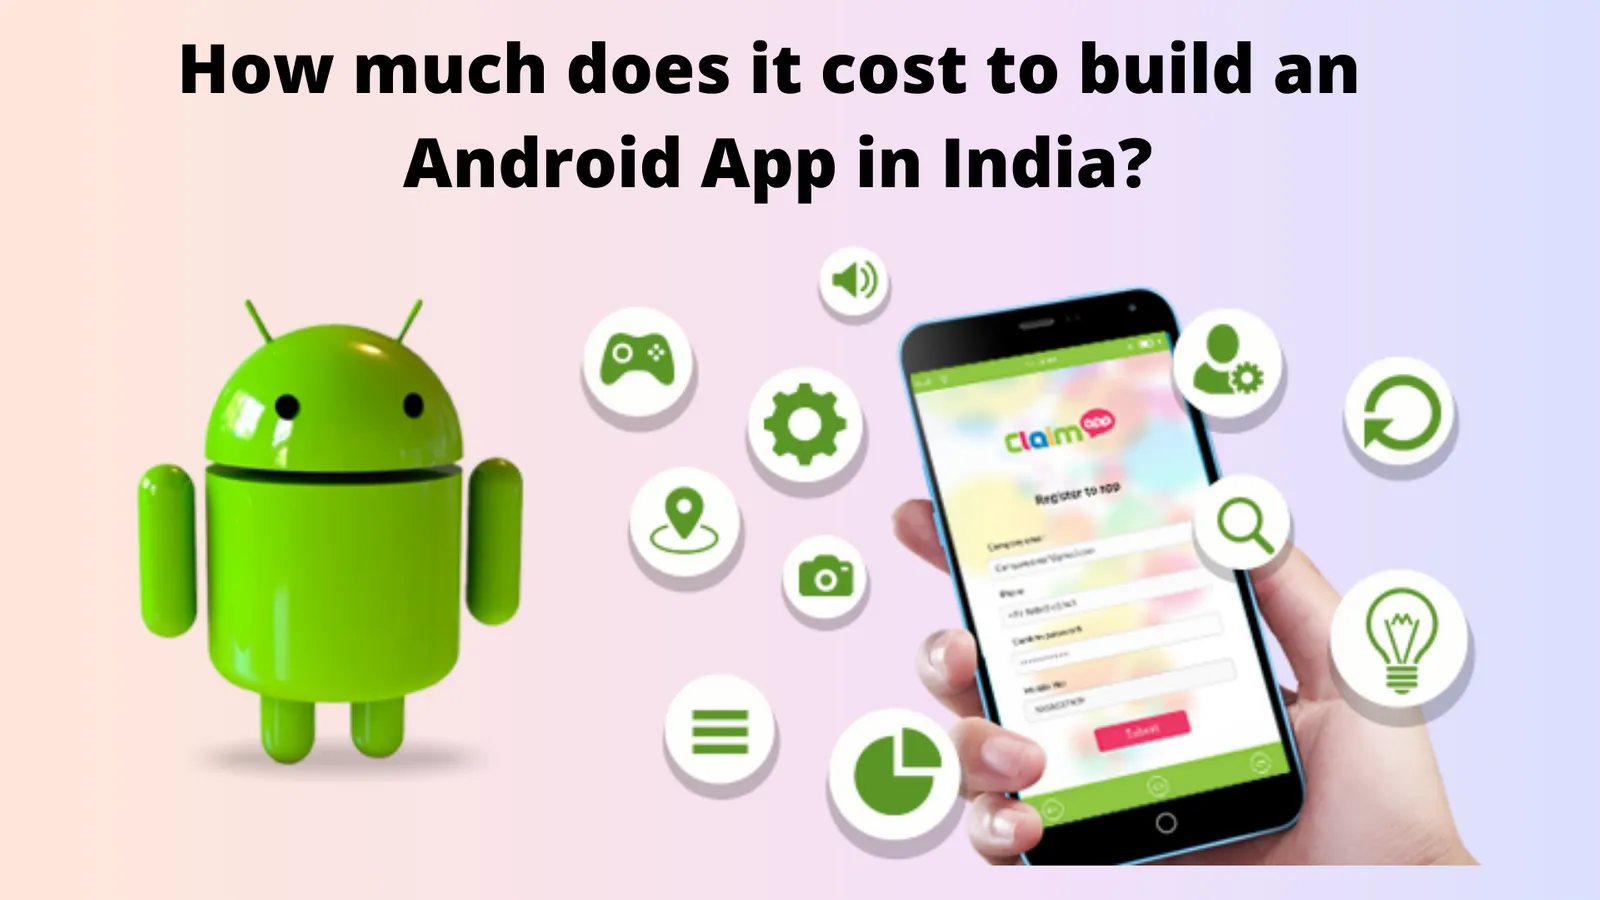 How much does it cost to build an Android app in India?